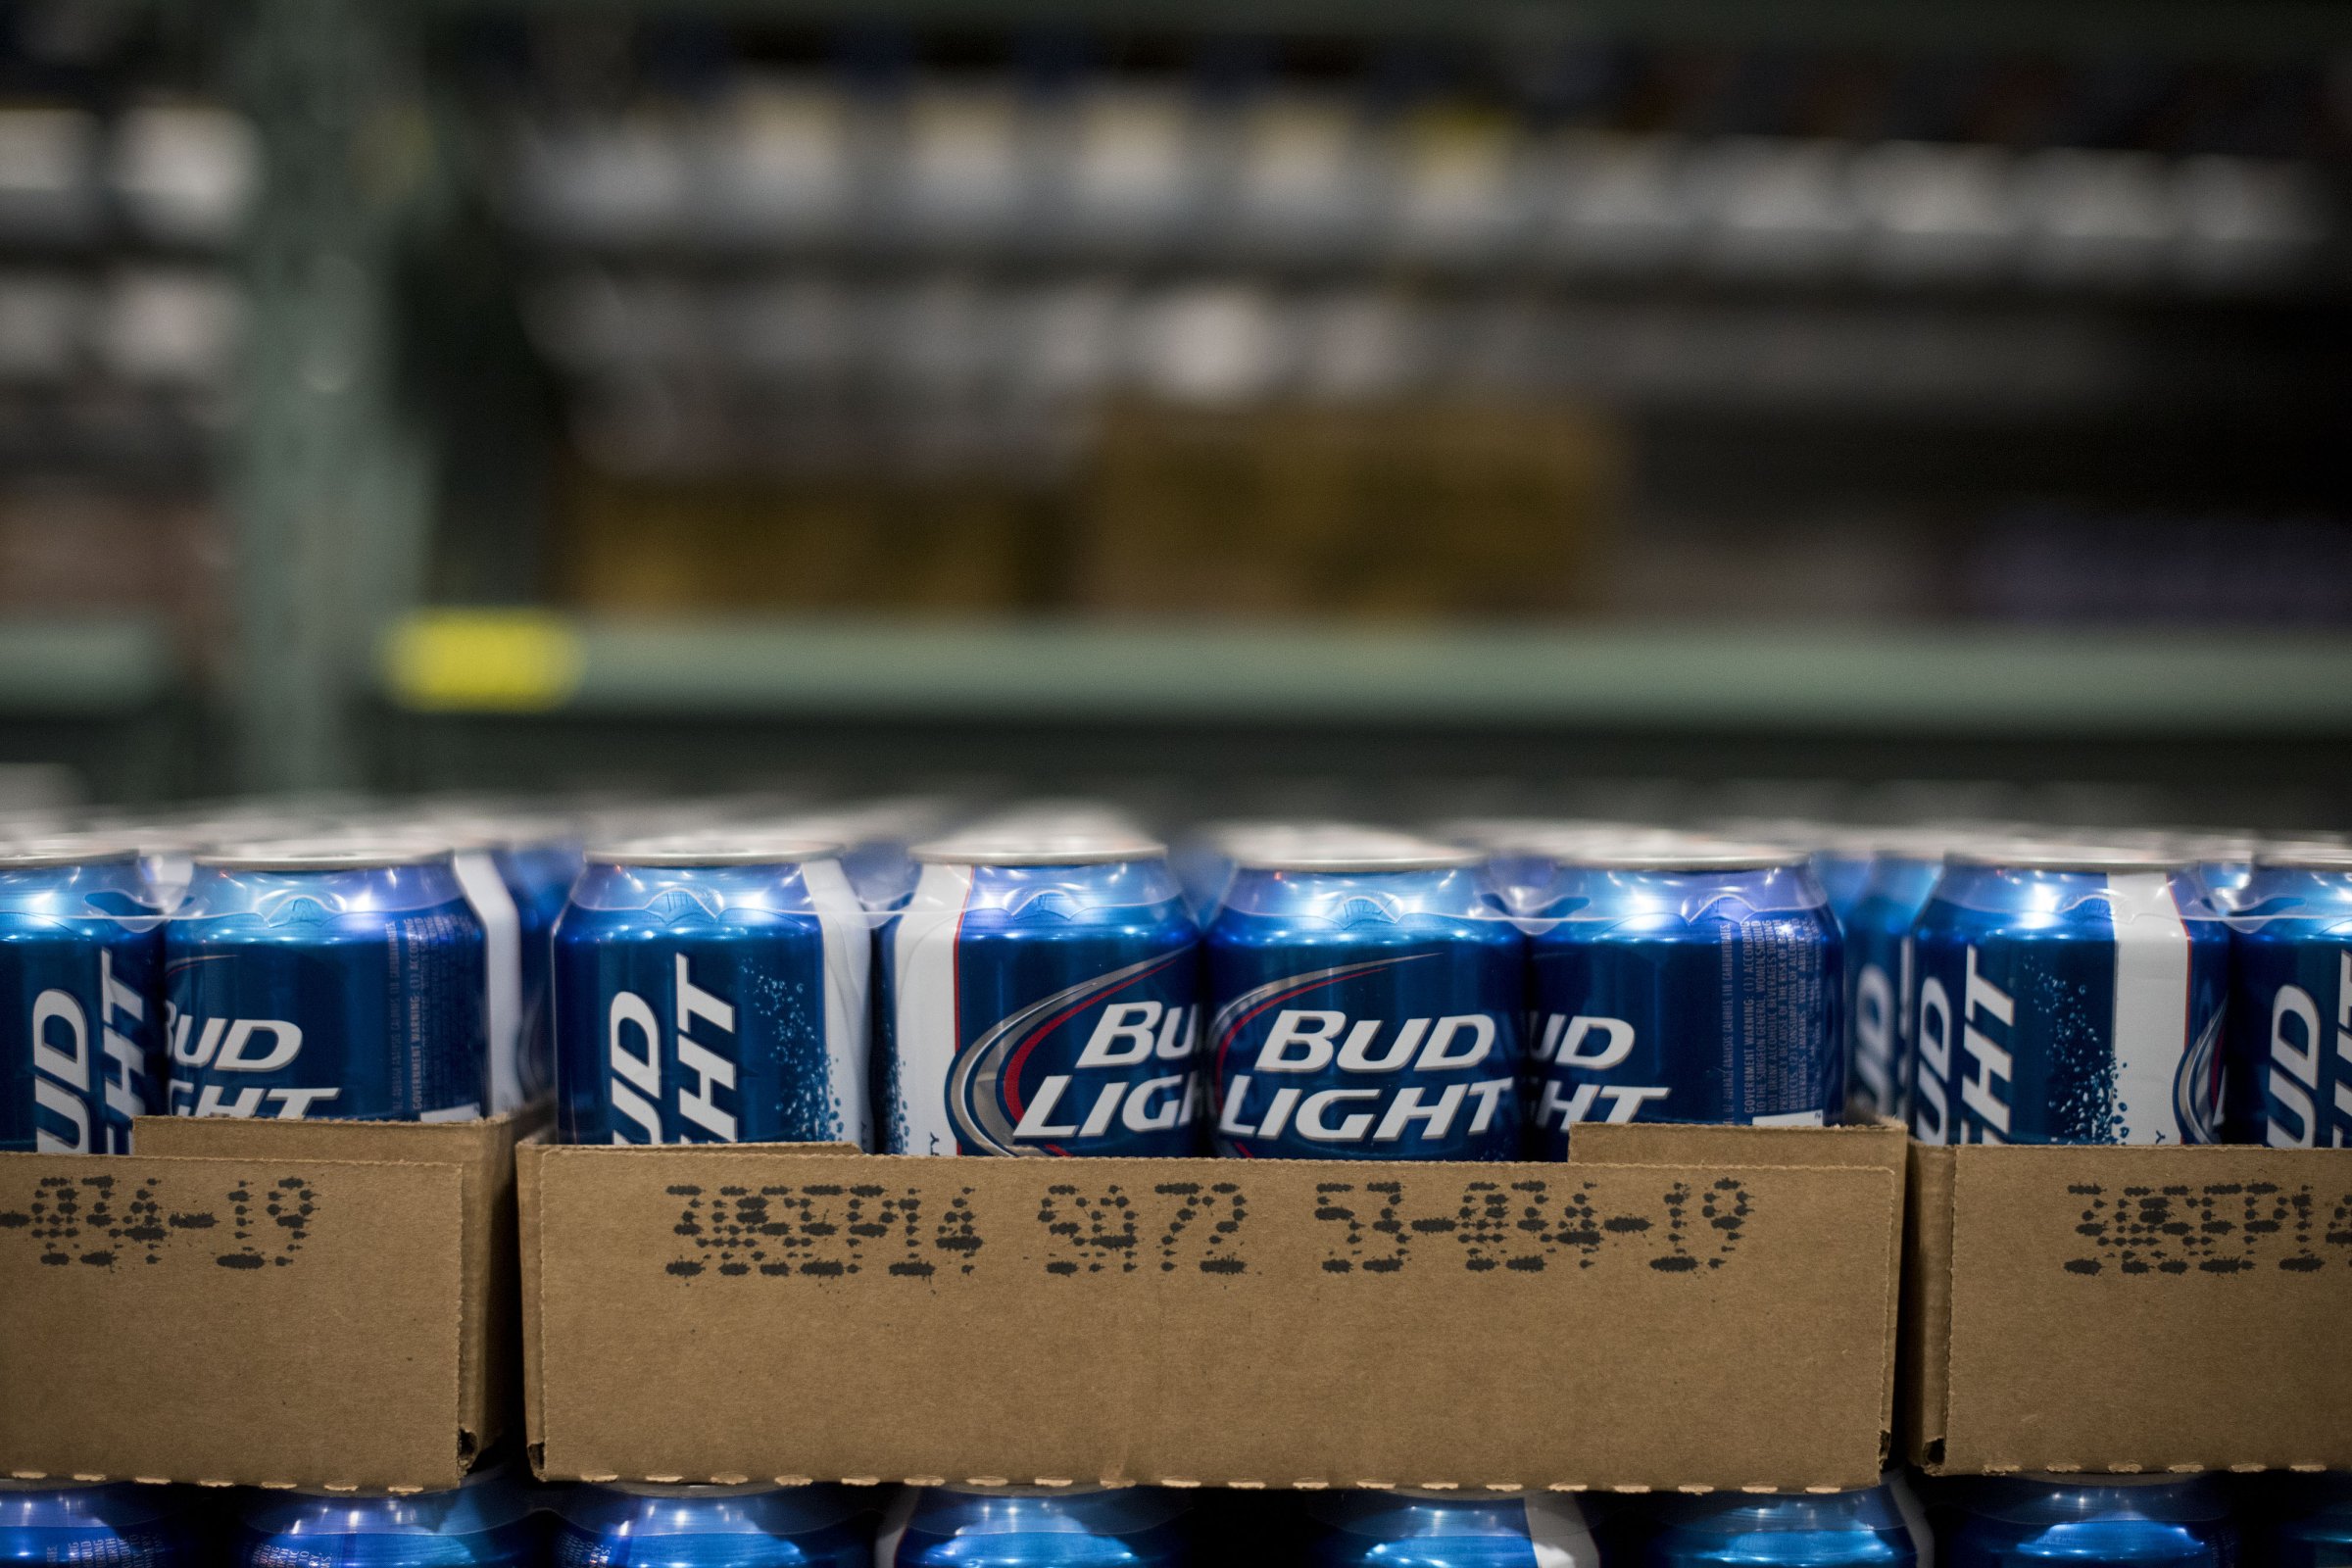 Cans of Anheuser-Busch Bud Light brand beer sits in a warehouse in Peoria, Ill.